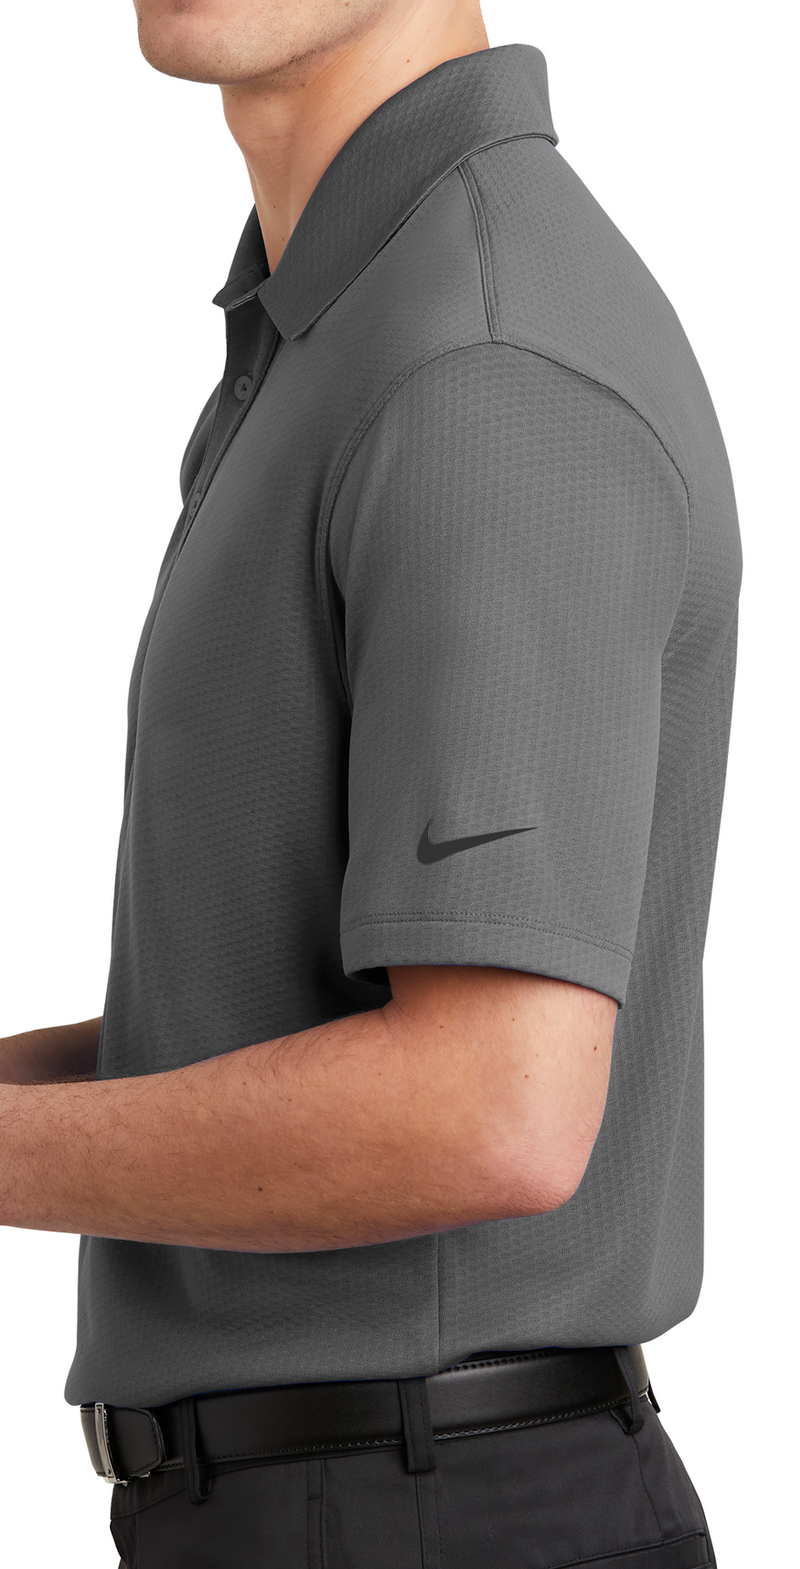 Nike [NKAH6266] Dri-FIT Hex Textured Polo. Live Chat For Bulk Discounts.